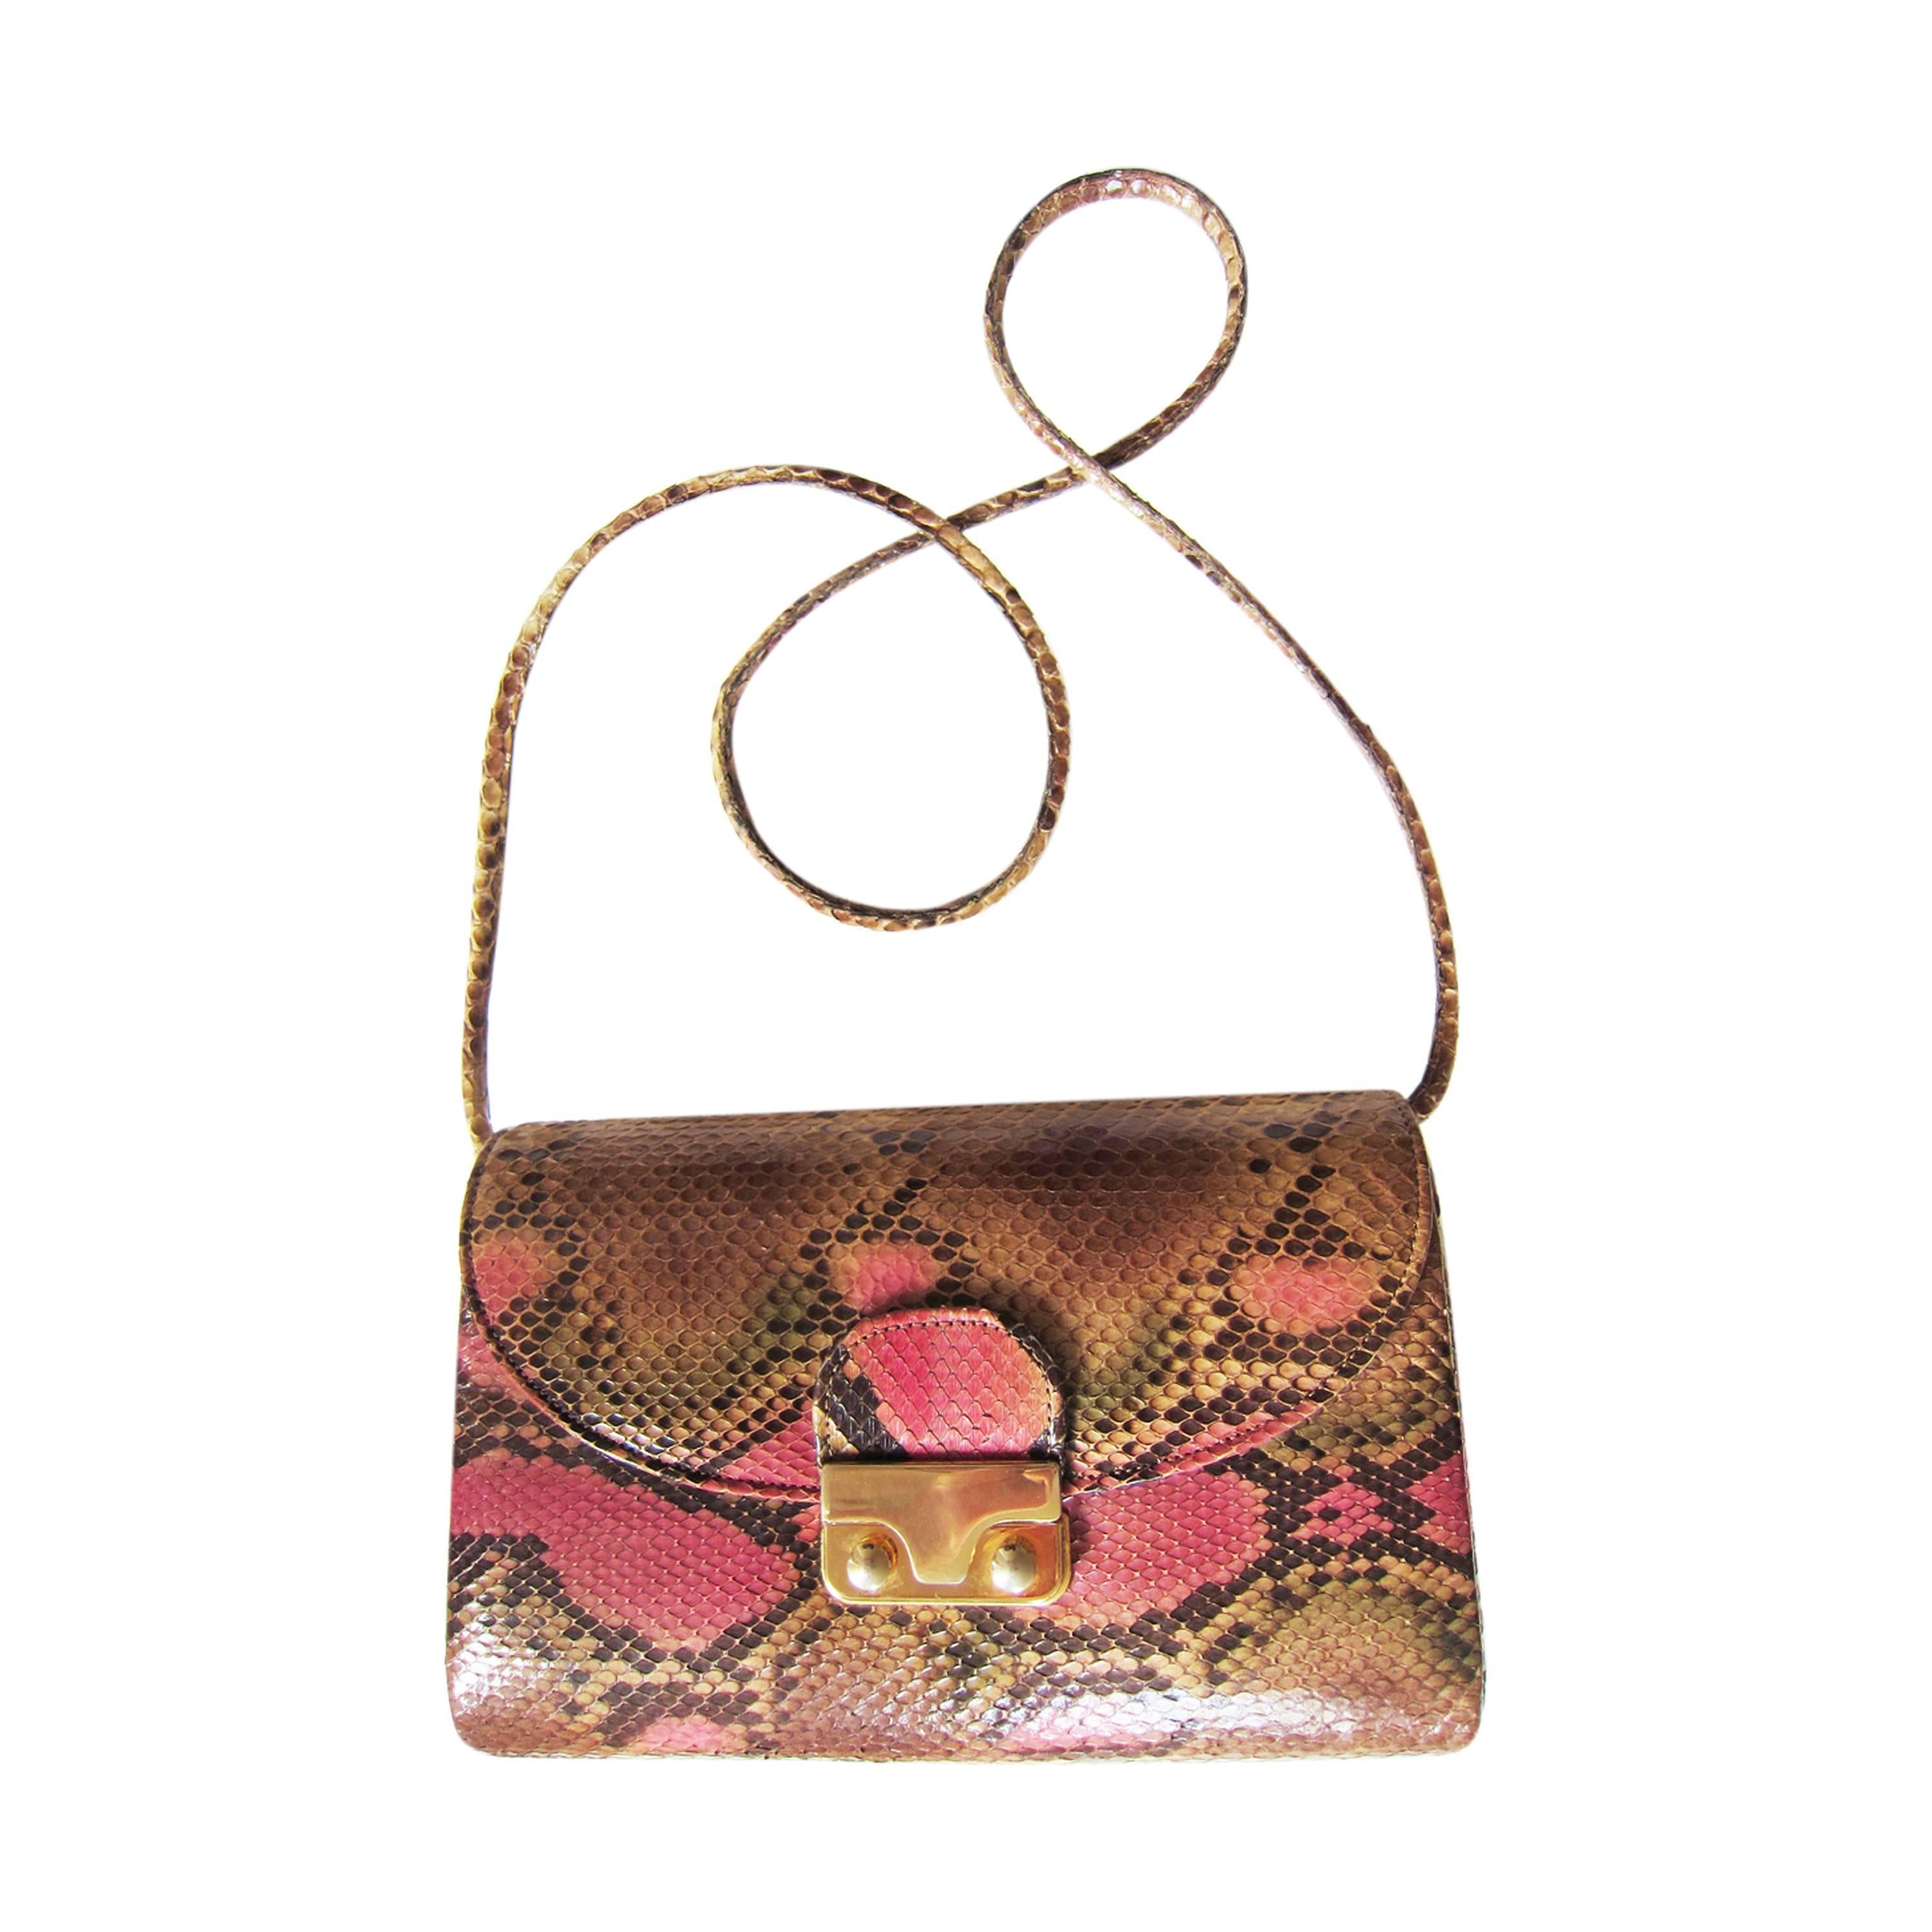 Vintage pink python shoulder clutch purse from circa 1970's.
This rare found no name purse has gold hardware closure and an zip pocket inside, in excellent condition.
Measurements : 
22 cm x 15 cm x 6.5 cm
Total length strap : 110 cm